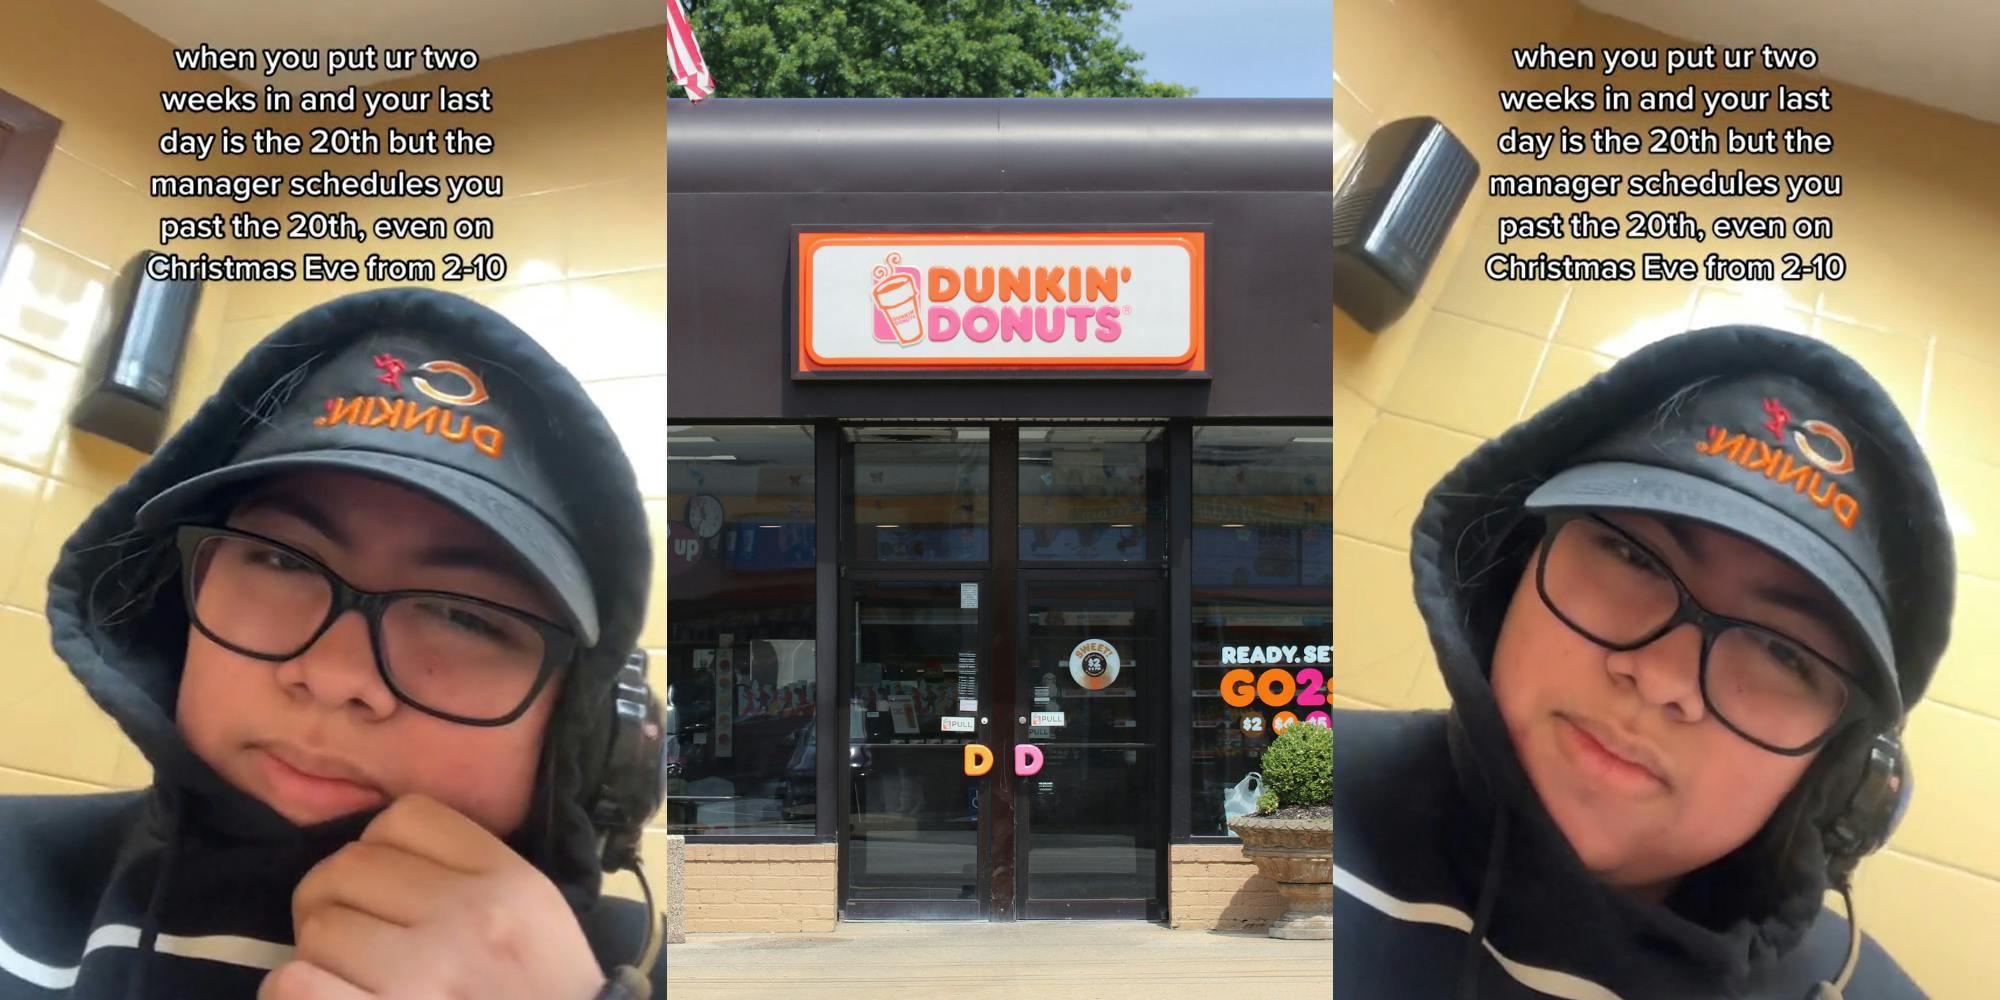 Dunkin worker with caption "when you put in ur two weeks in and your last day is the 20th but the manager schedules you past the 20th, even on Christmas Eve from 2-10" (l) Dunkin' Donuts sign on building (c) Dunkin worker with caption "when you put in ur two weeks in and your last day is the 20th but the manager schedules you past the 20th, even on Christmas Eve from 2-10" (r)